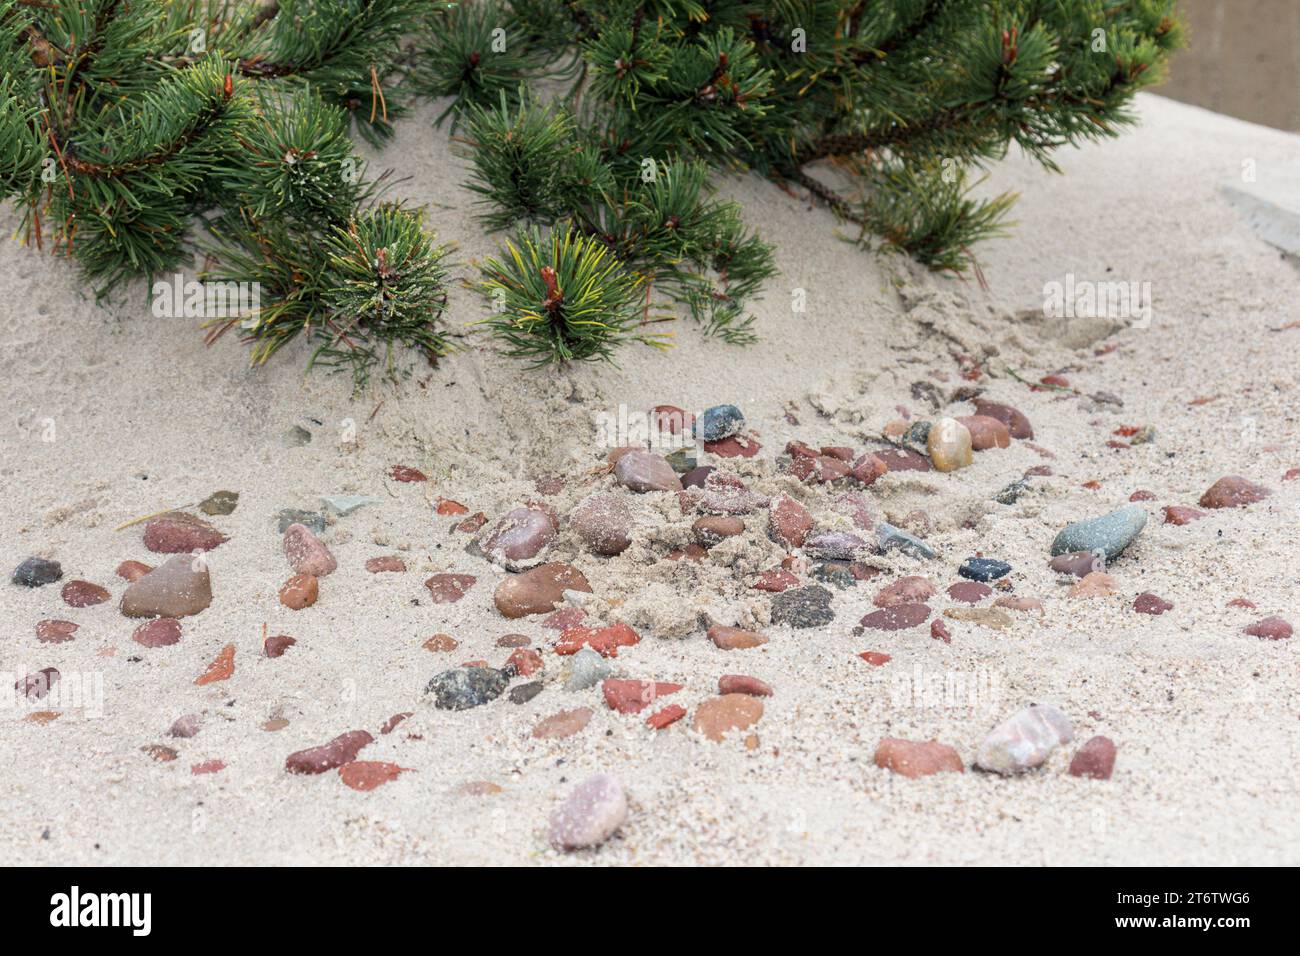 Pine tree needles on beach sand with small colorful stones Stock Photo